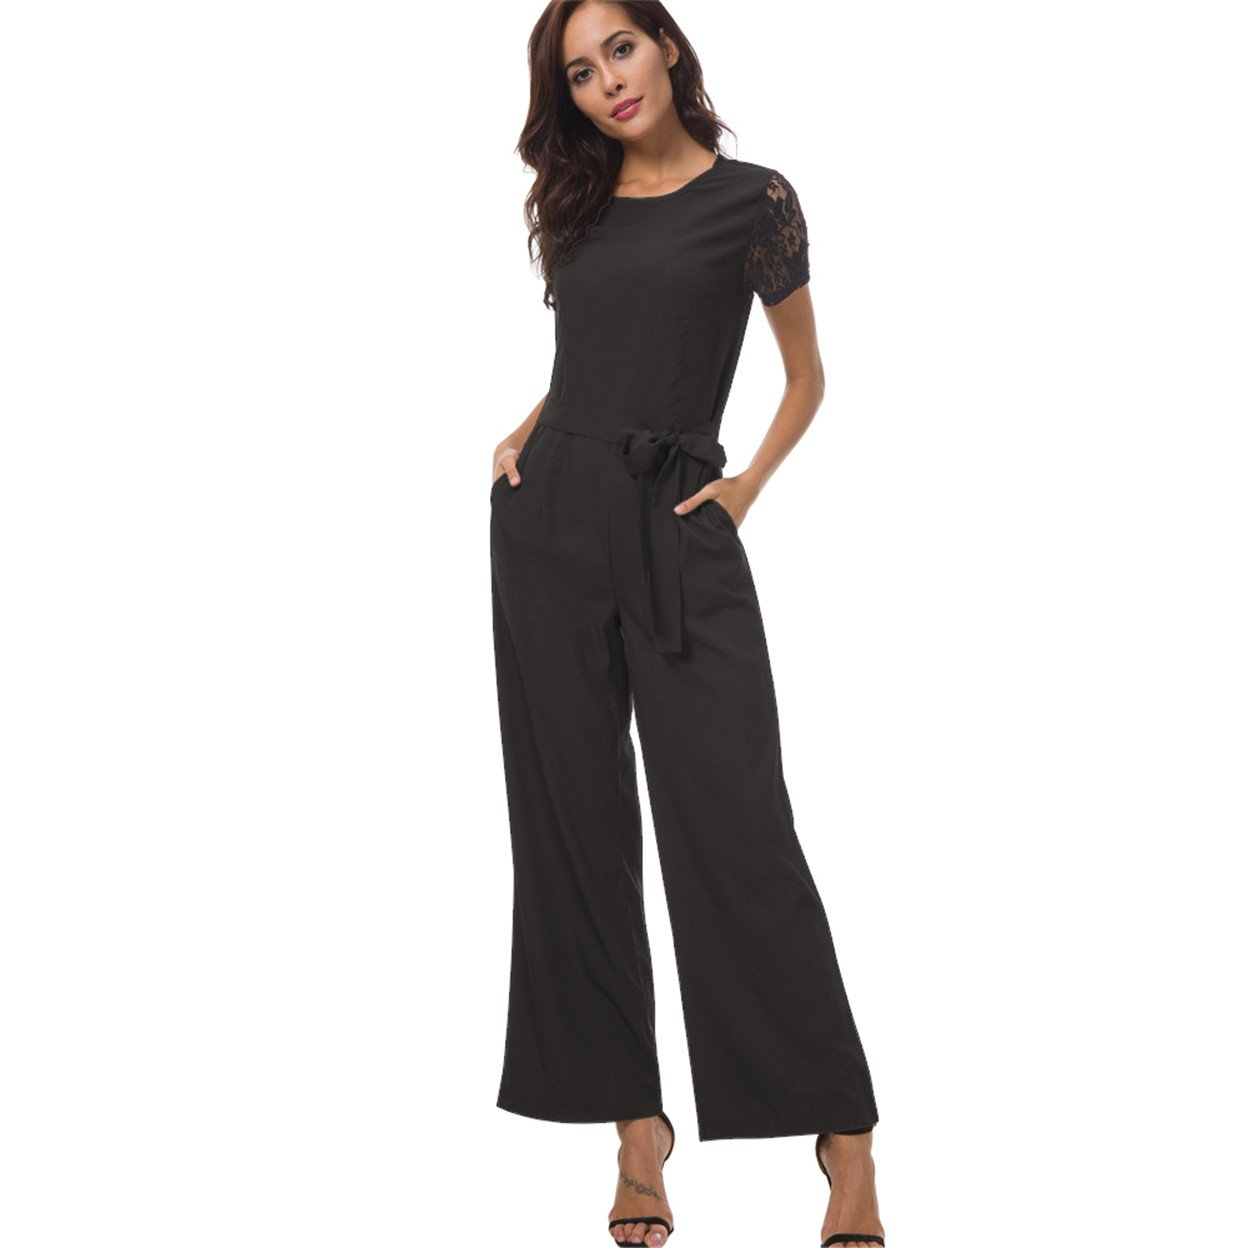 Buy Lace Sleeve Wide Leg Pants Long Romper by GiftStores on OpenSky